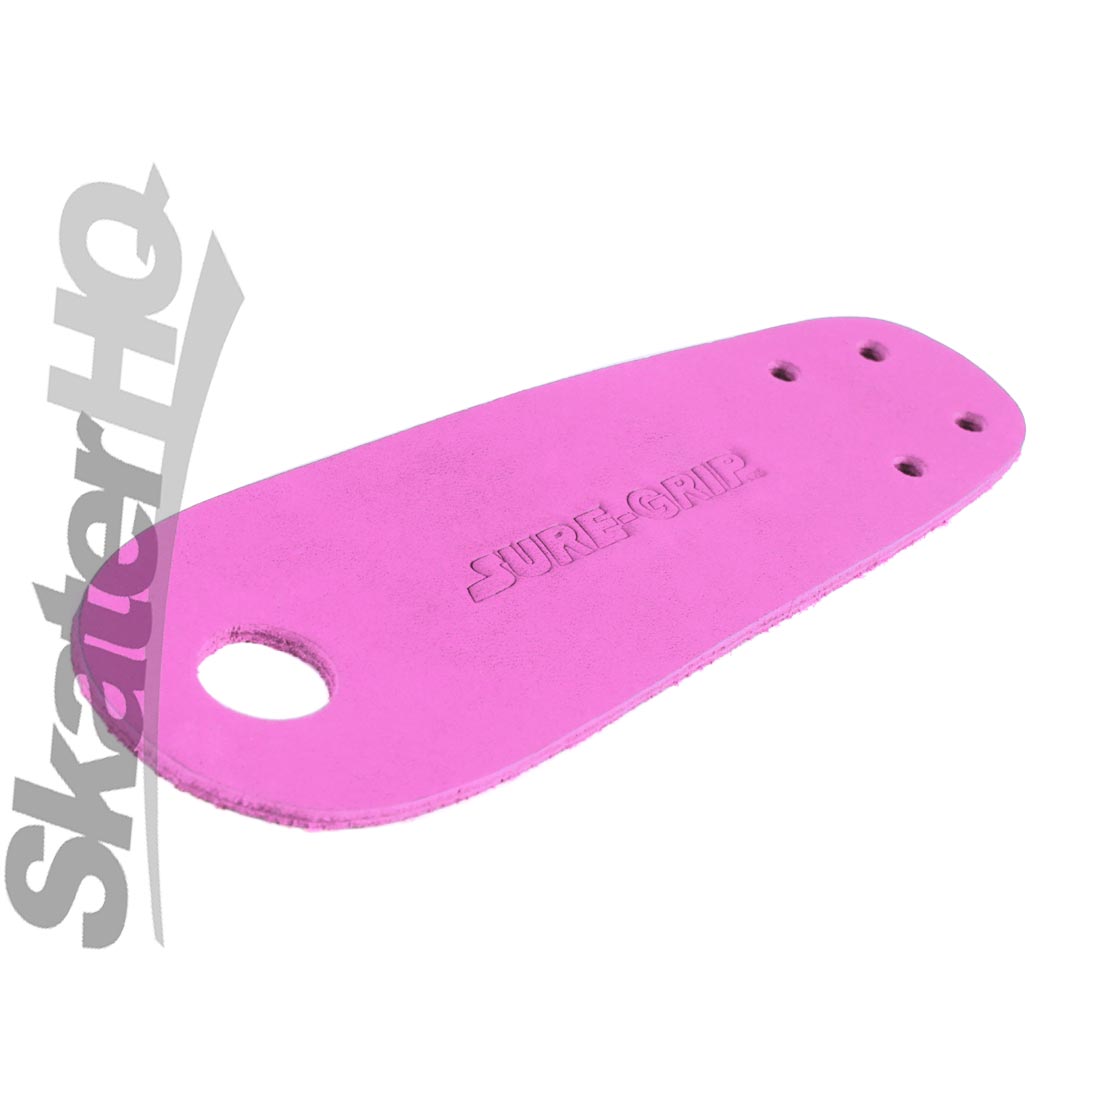 Sure-Grip Toe Guards - Pink Roller Skate Hardware and Parts